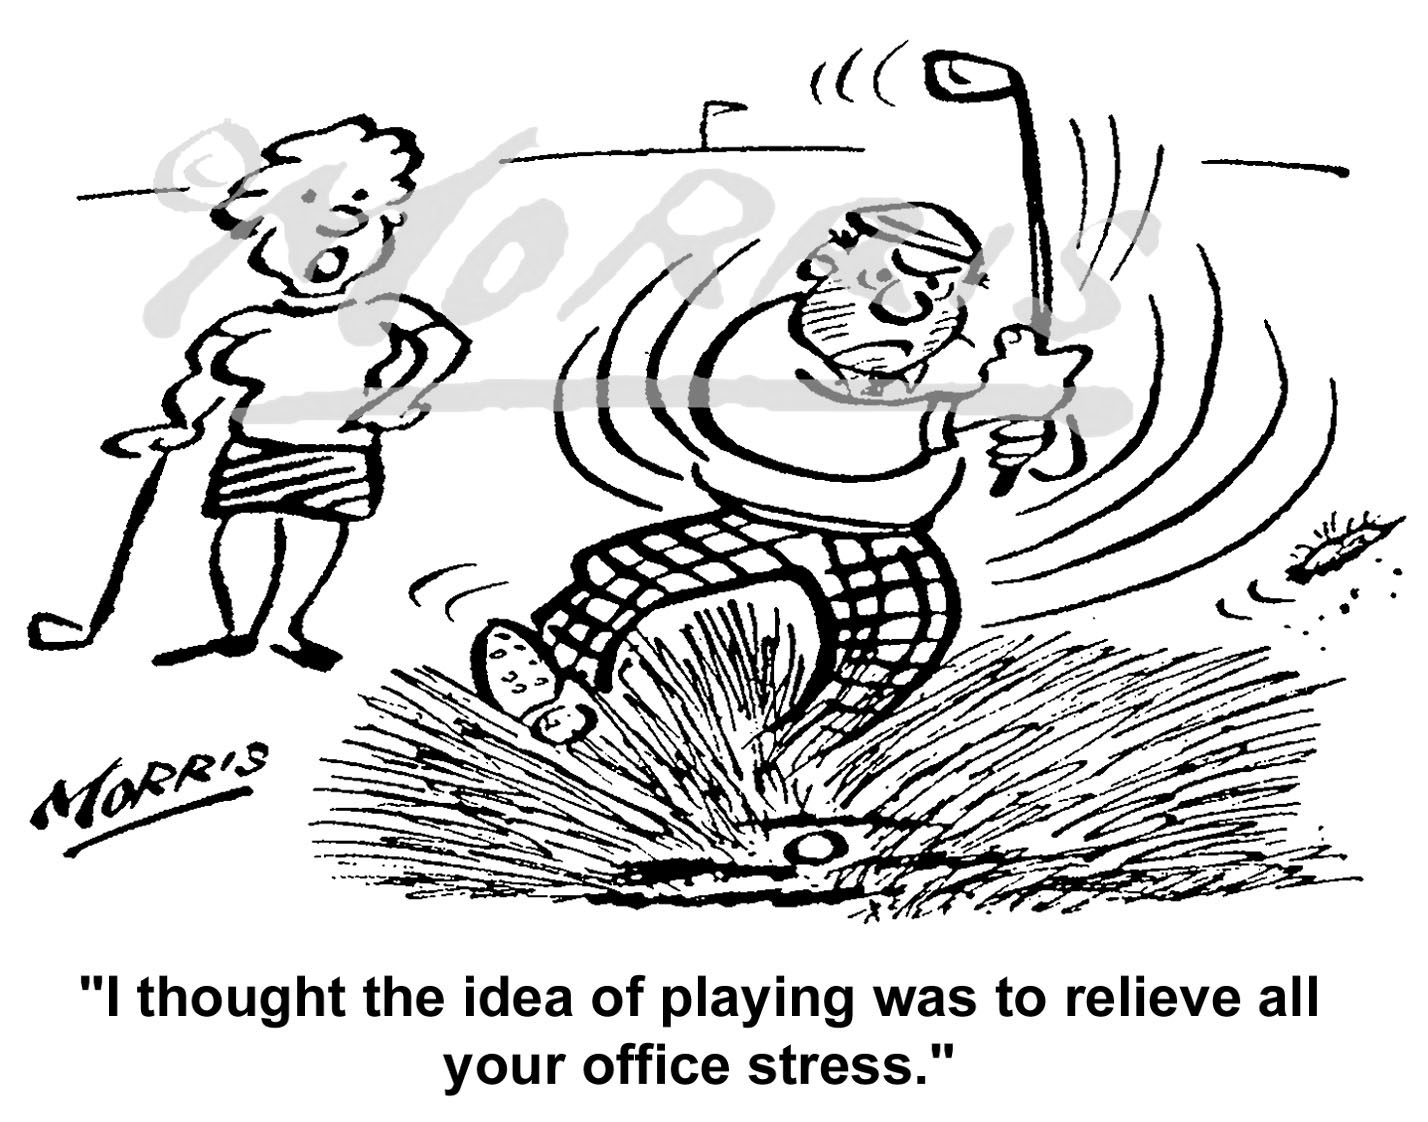 Stress in the office and workplace cartoon, Golf cartoon, golfing cartoon, golf cartoons, golfing cartoons, golf comic, golfing comic, golf course cartoon, shareholders cartoon, golf club cartoon